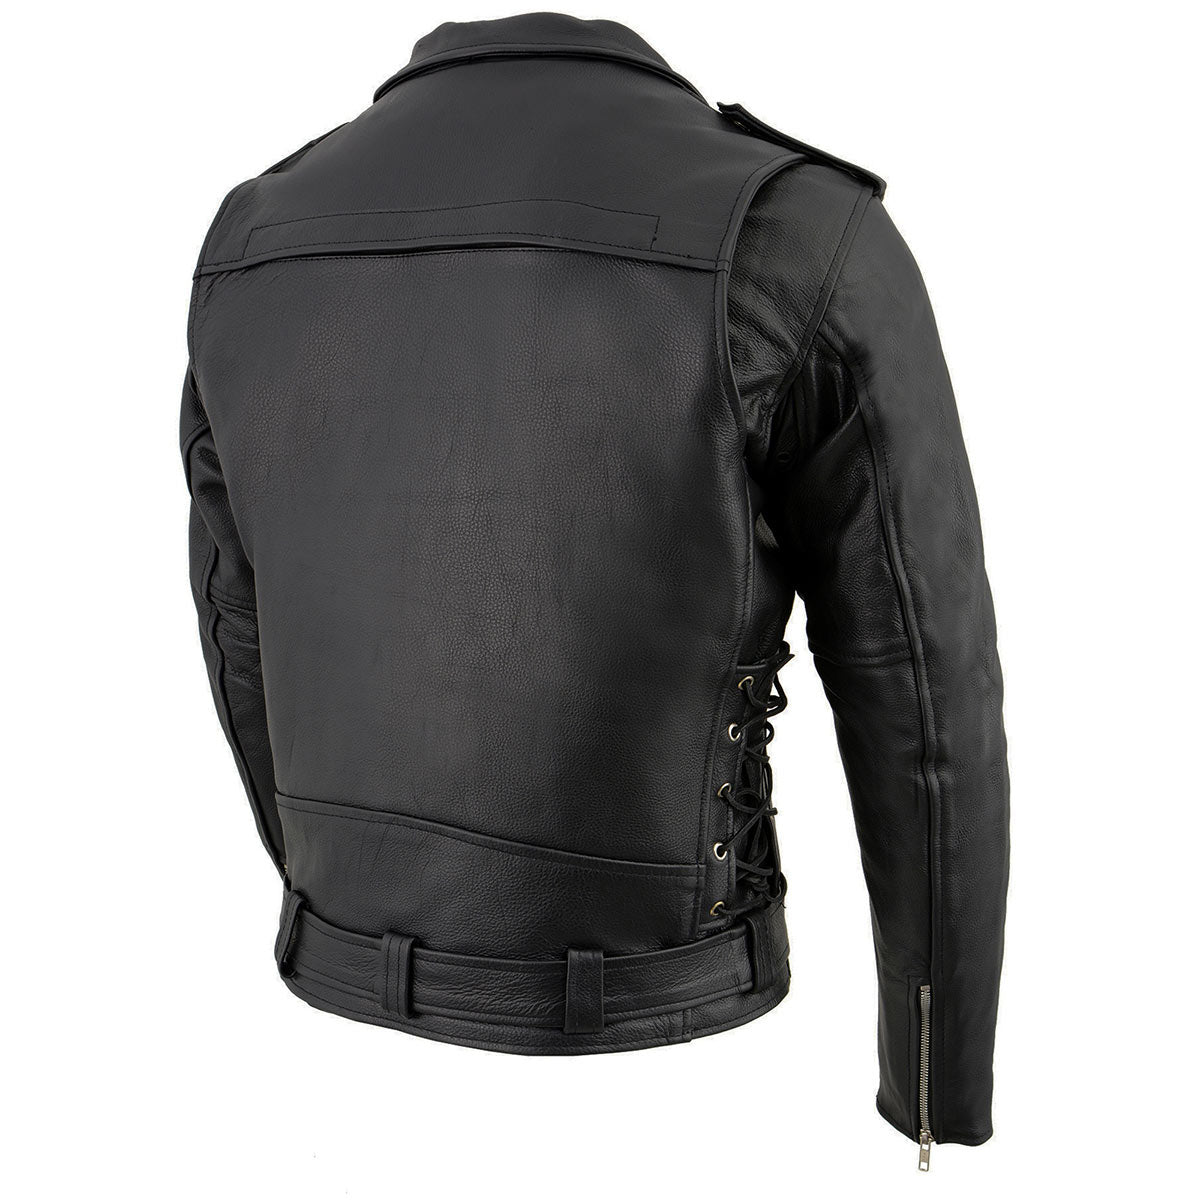 Milwaukee Leather LKM1775 Black Leather Motorcycle Jacket for Men, Thick Brando Style Biker Jacket w/ Side Lace